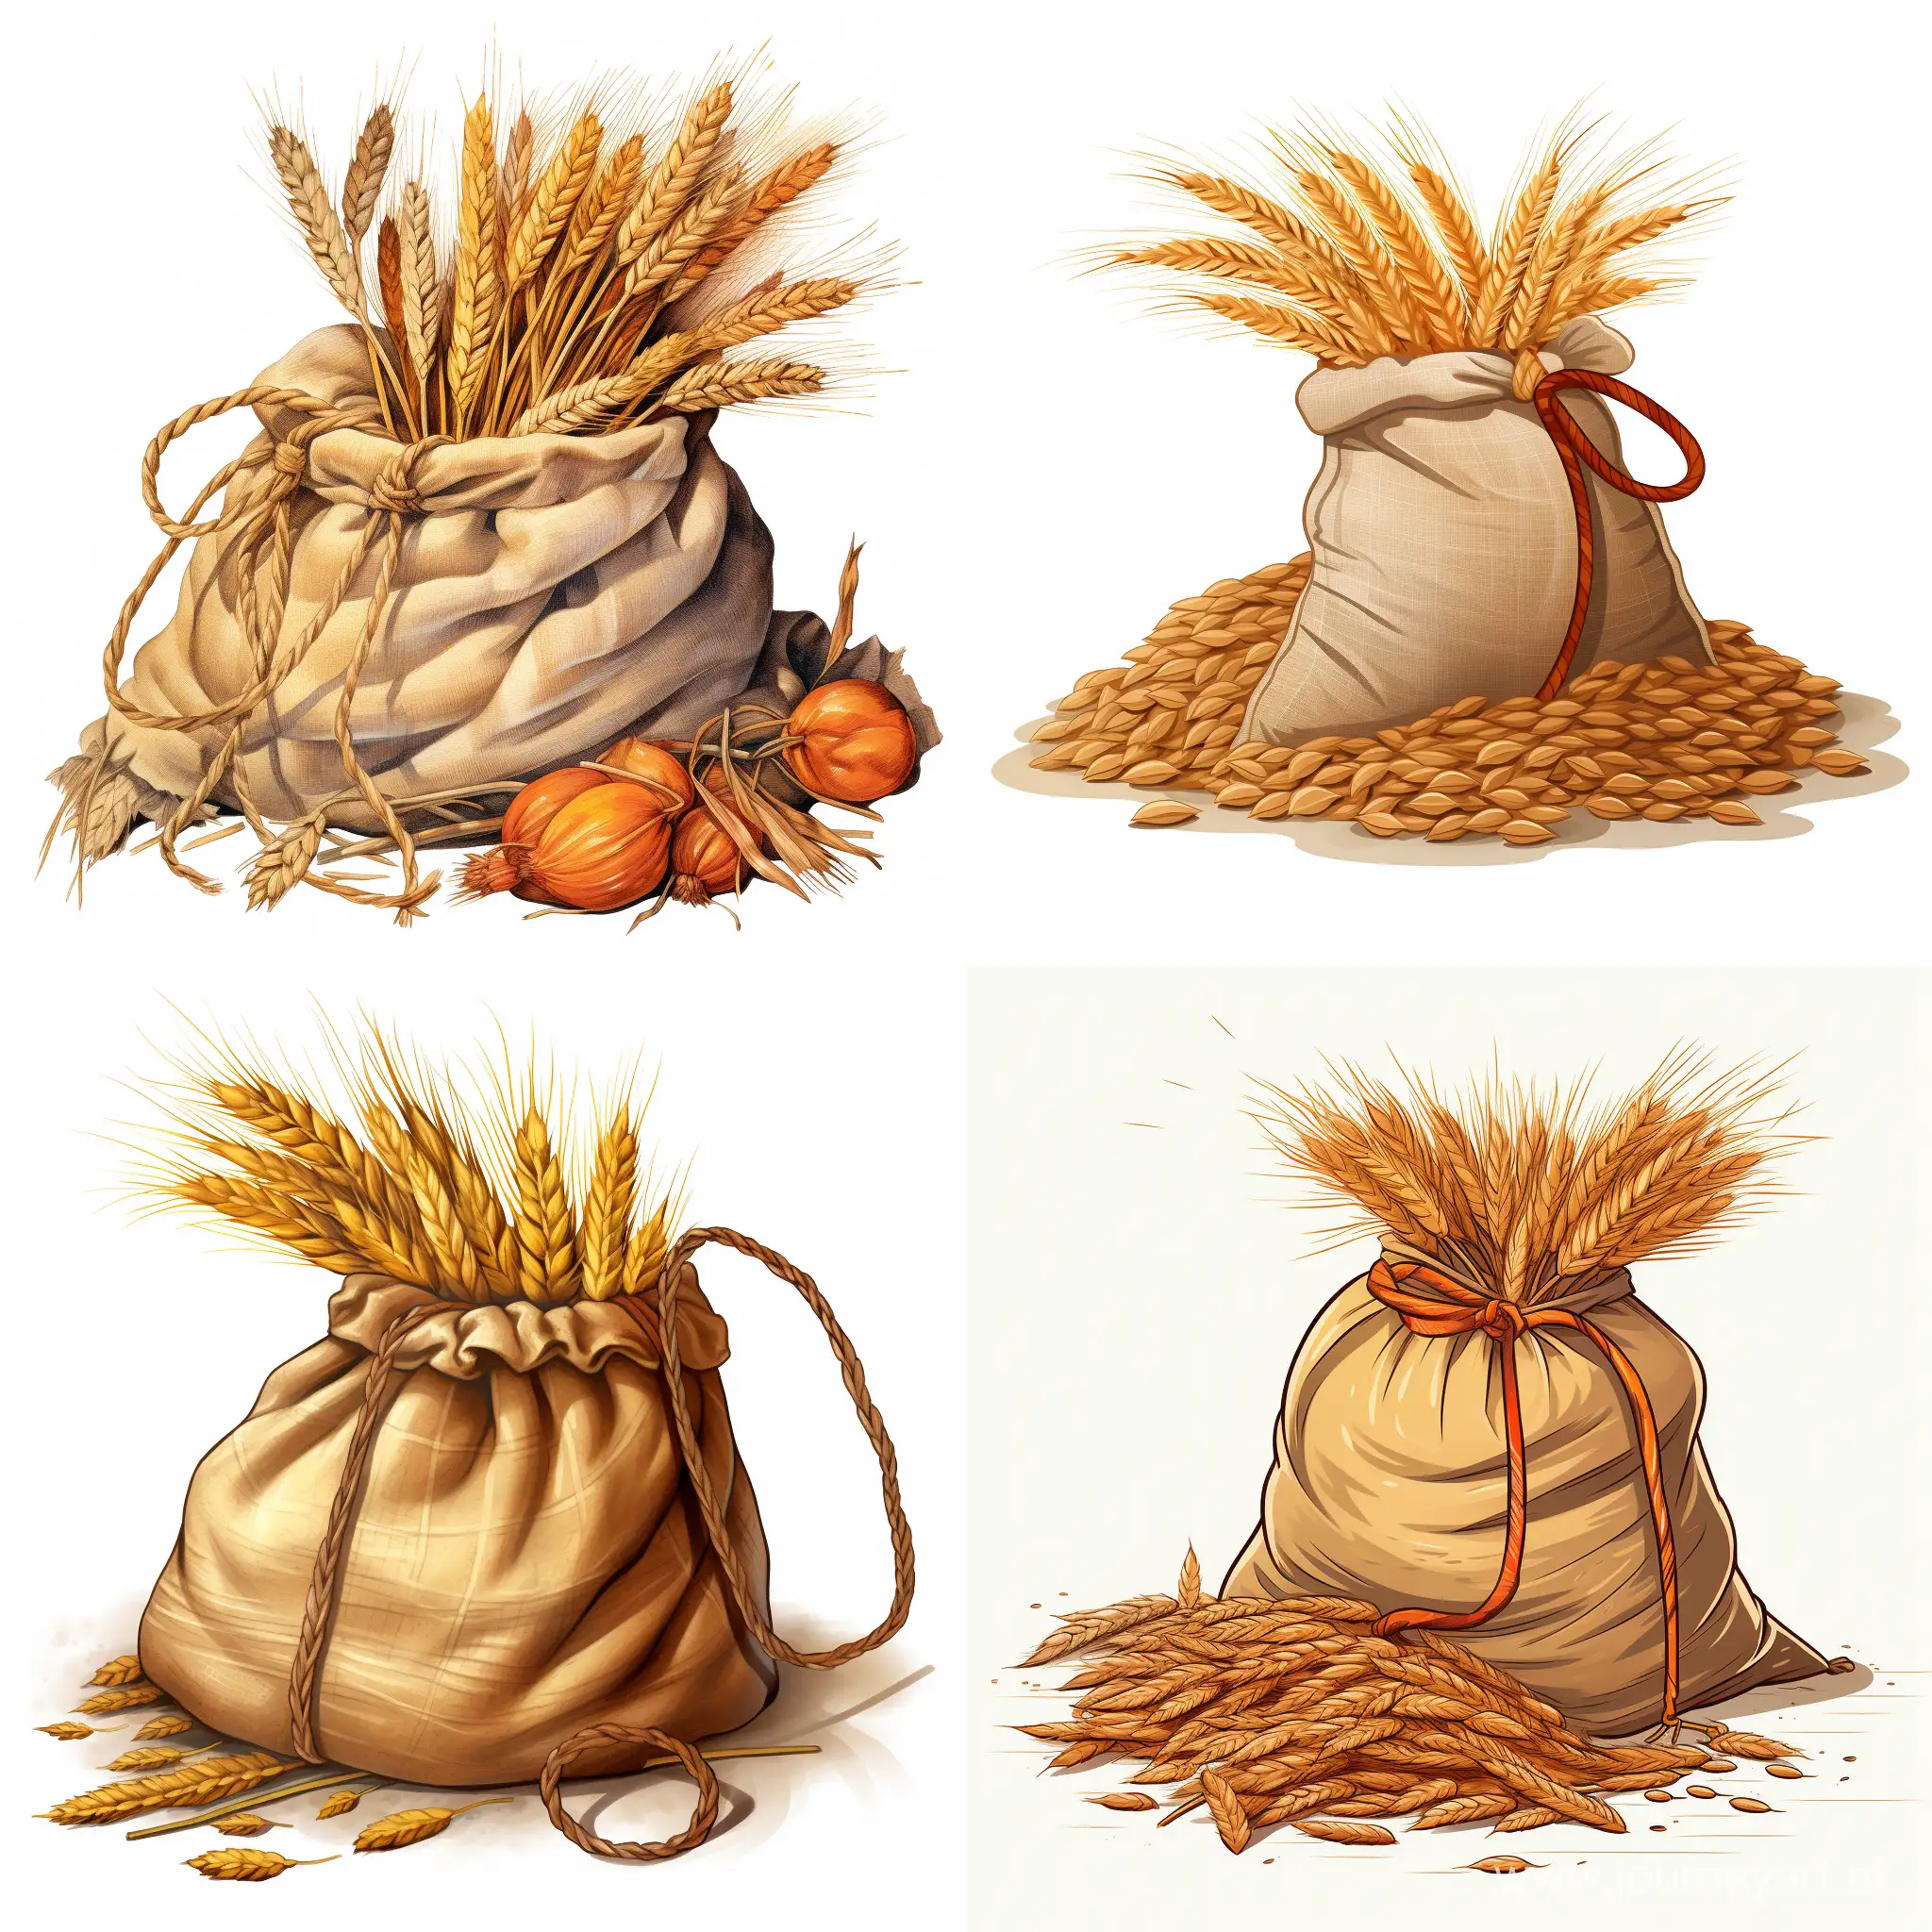 Wholesome-Cartoon-Sack-of-Wheat-on-a-White-Background